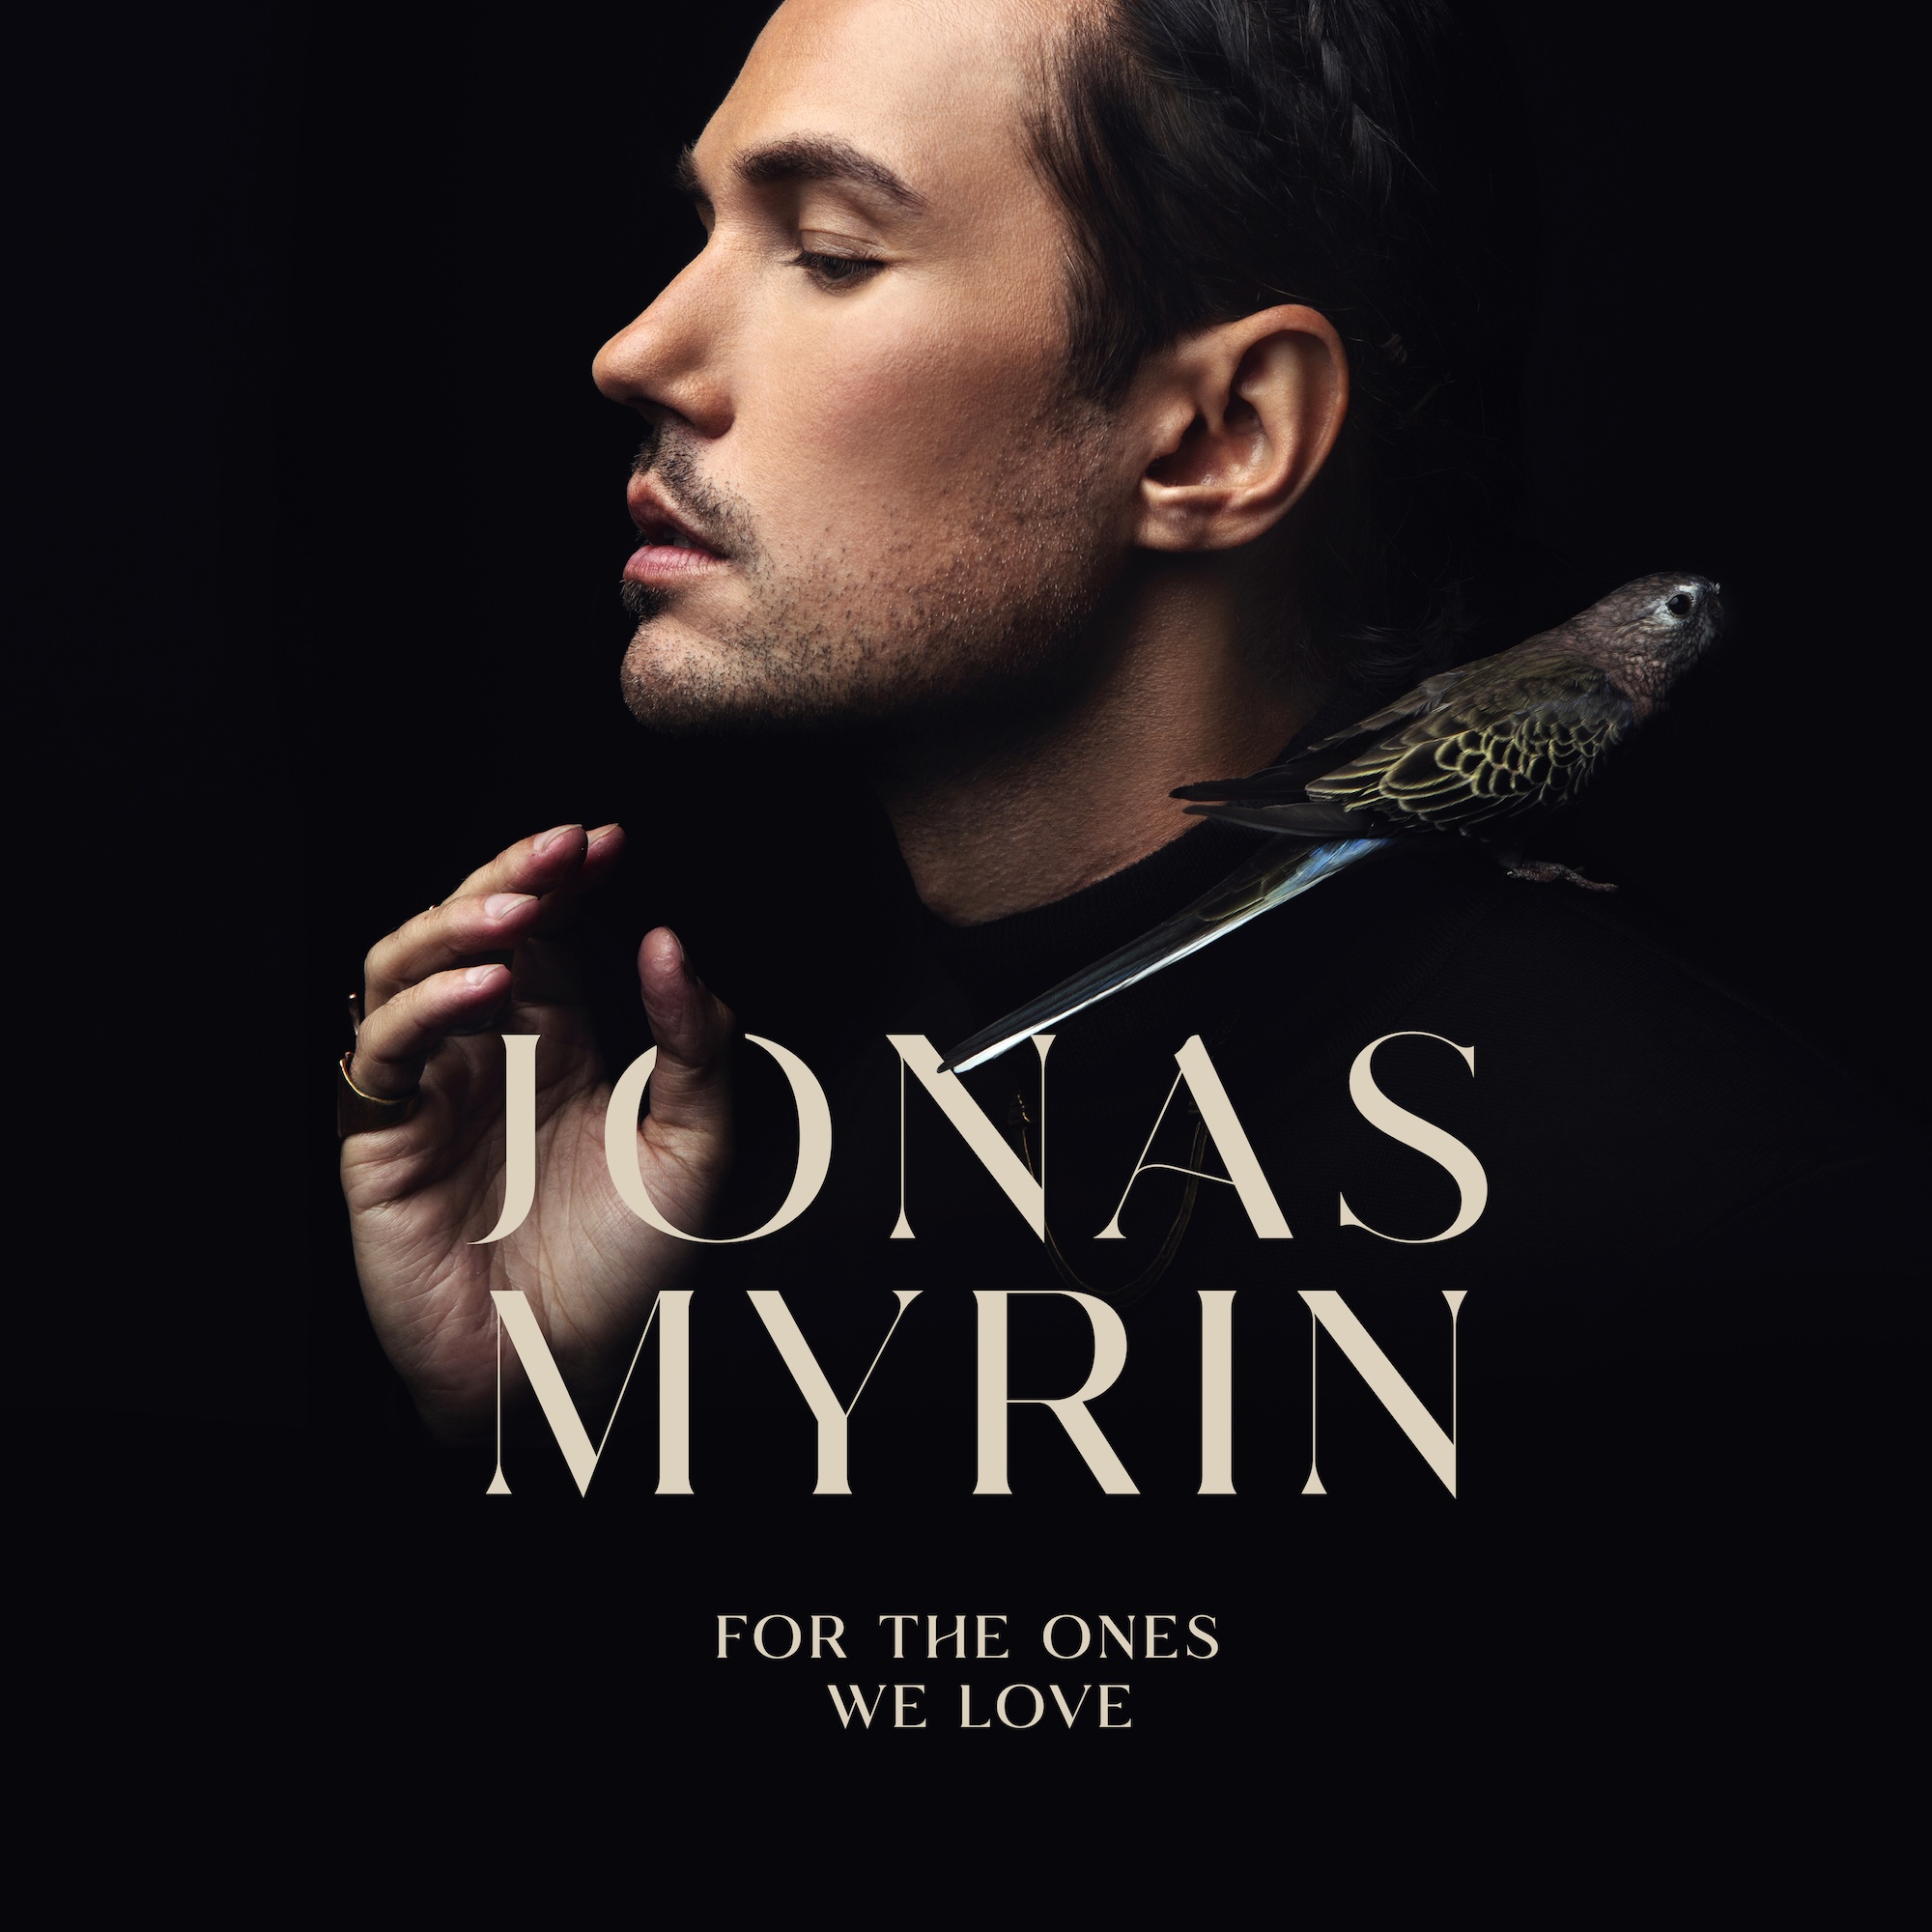 Cover art for Jonas Myrin single, "For the Ones We Love." Portrait of man against black background with gold text that reads "Jonas Myrin, For the Ones We Love"